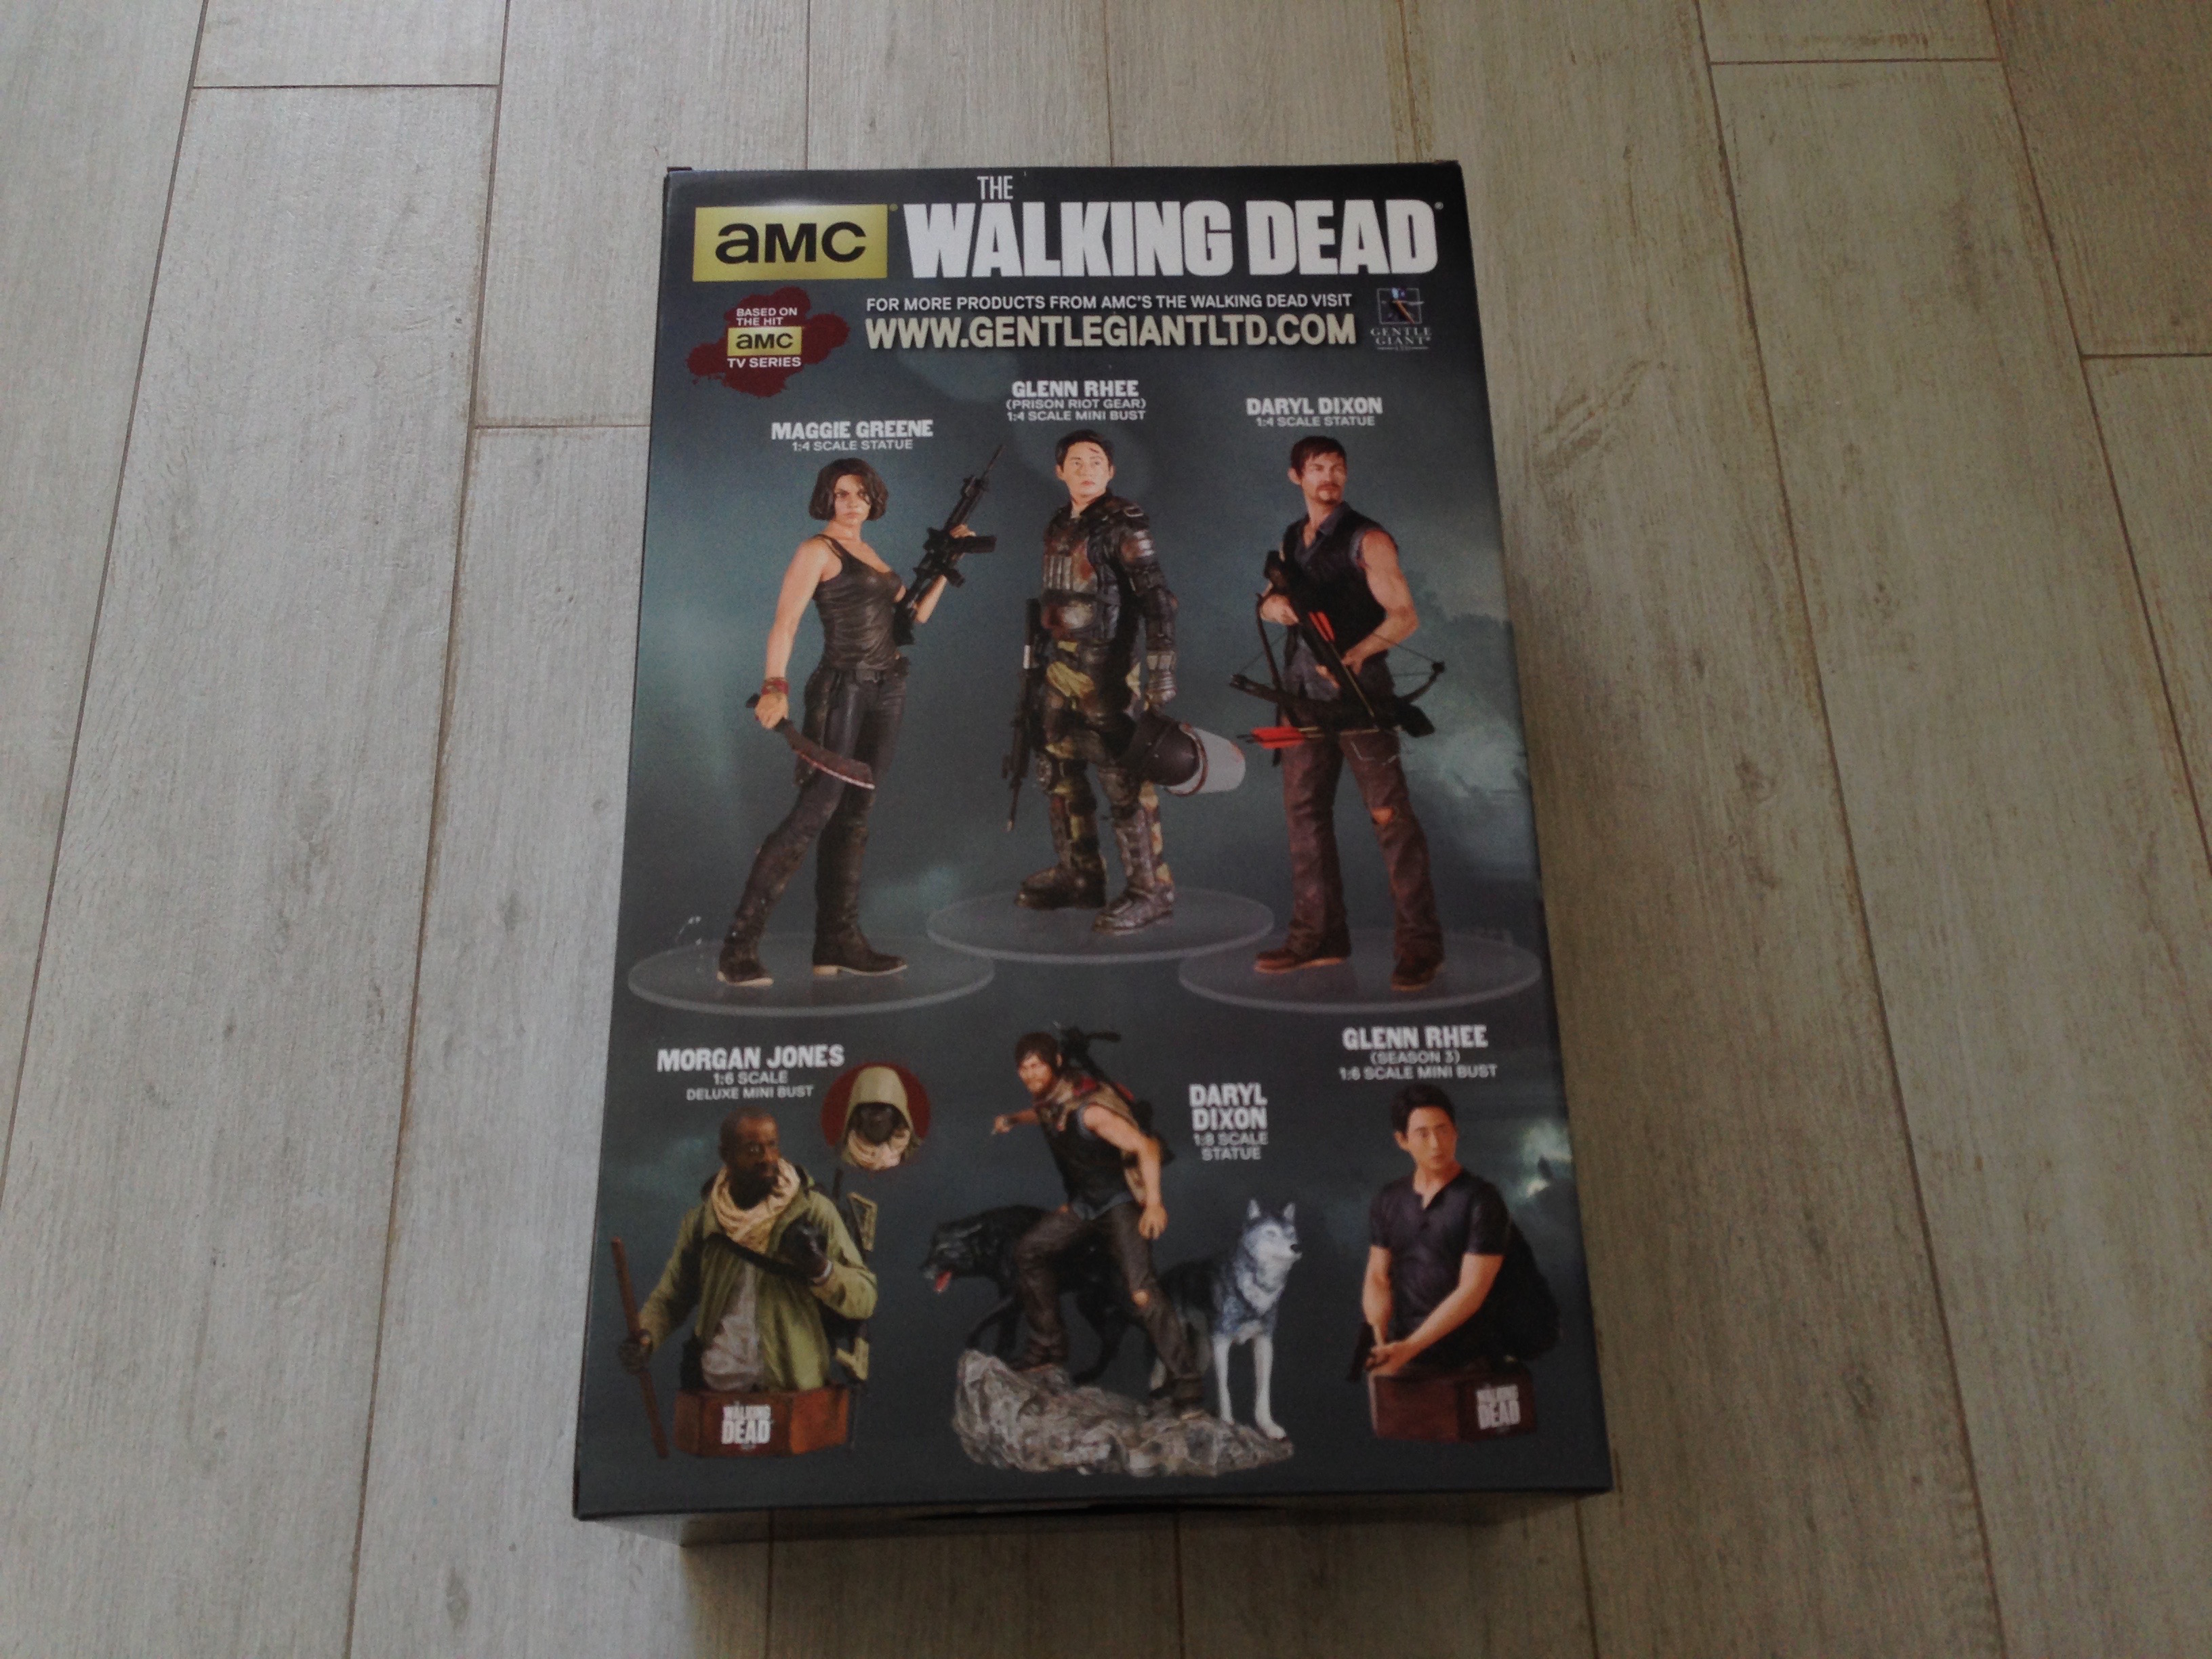 gentle-giant-the-walking-dead-rick-grimes-statue-toyslife-review-03